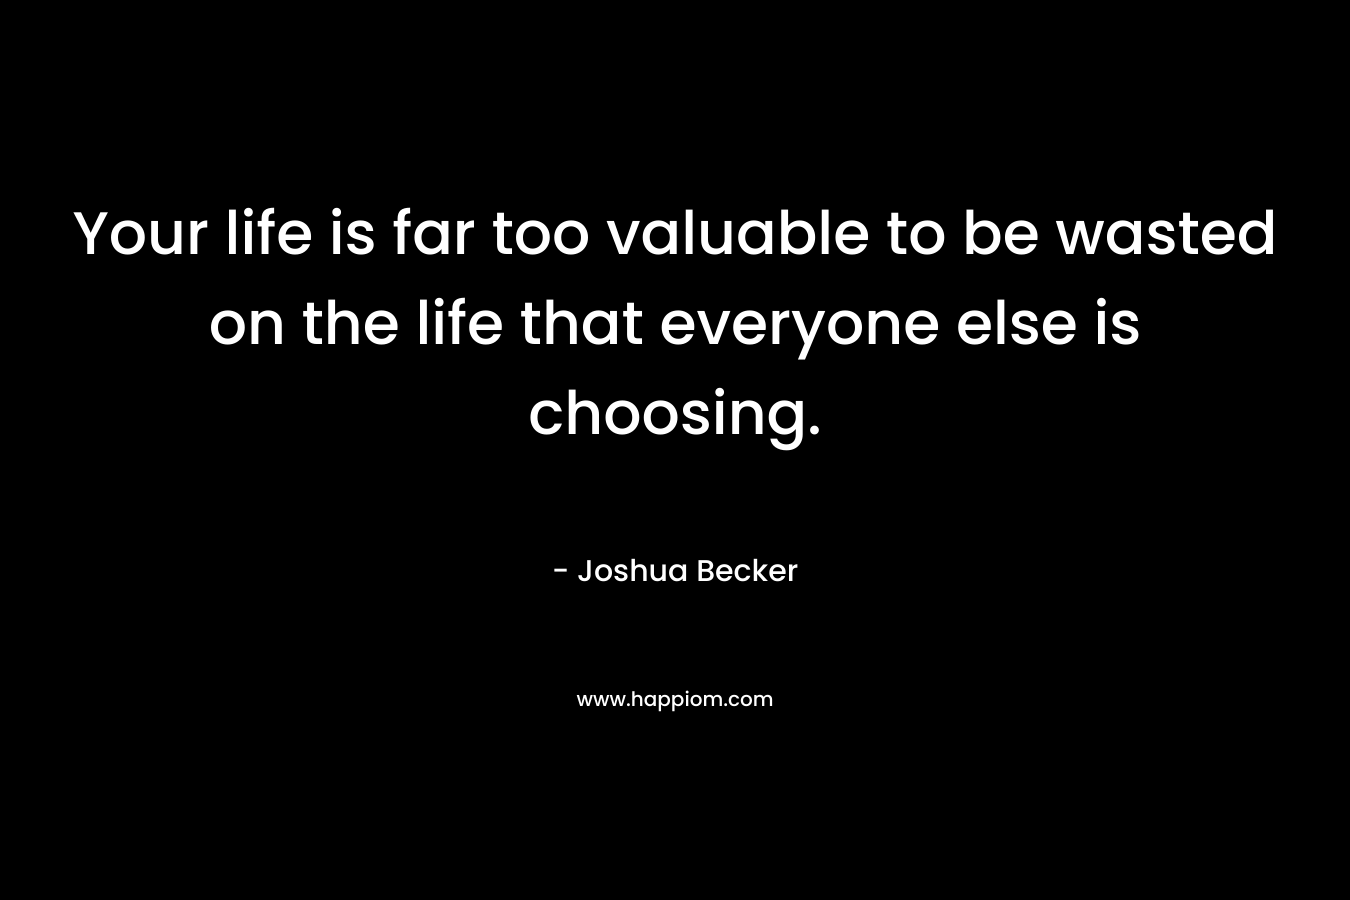 Your life is far too valuable to be wasted on the life that everyone else is choosing. – Joshua Becker